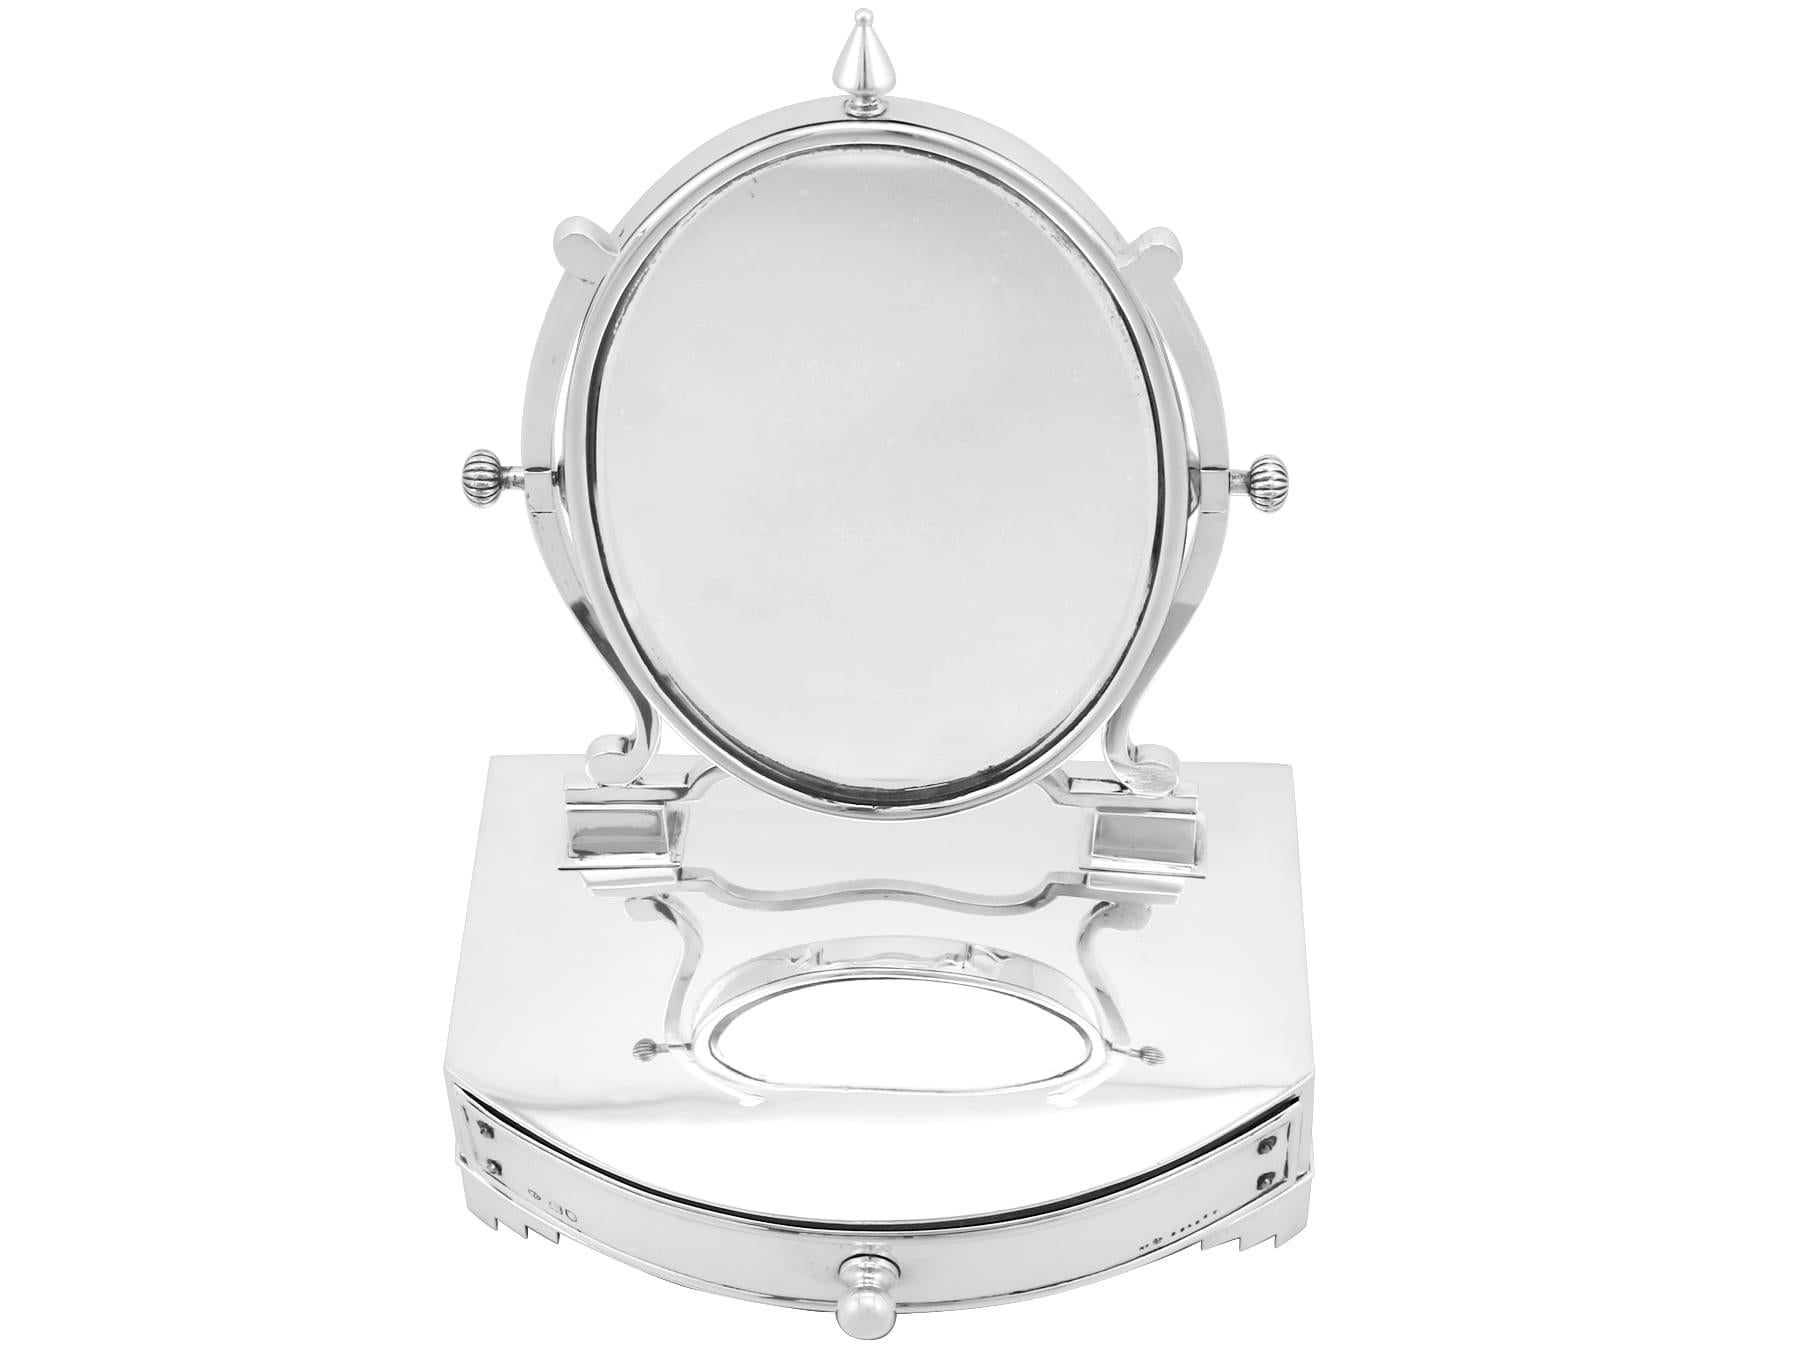 Sterling Silver Dressing Table Cheval Mirror and Jewelry Box In Excellent Condition For Sale In Jesmond, Newcastle Upon Tyne